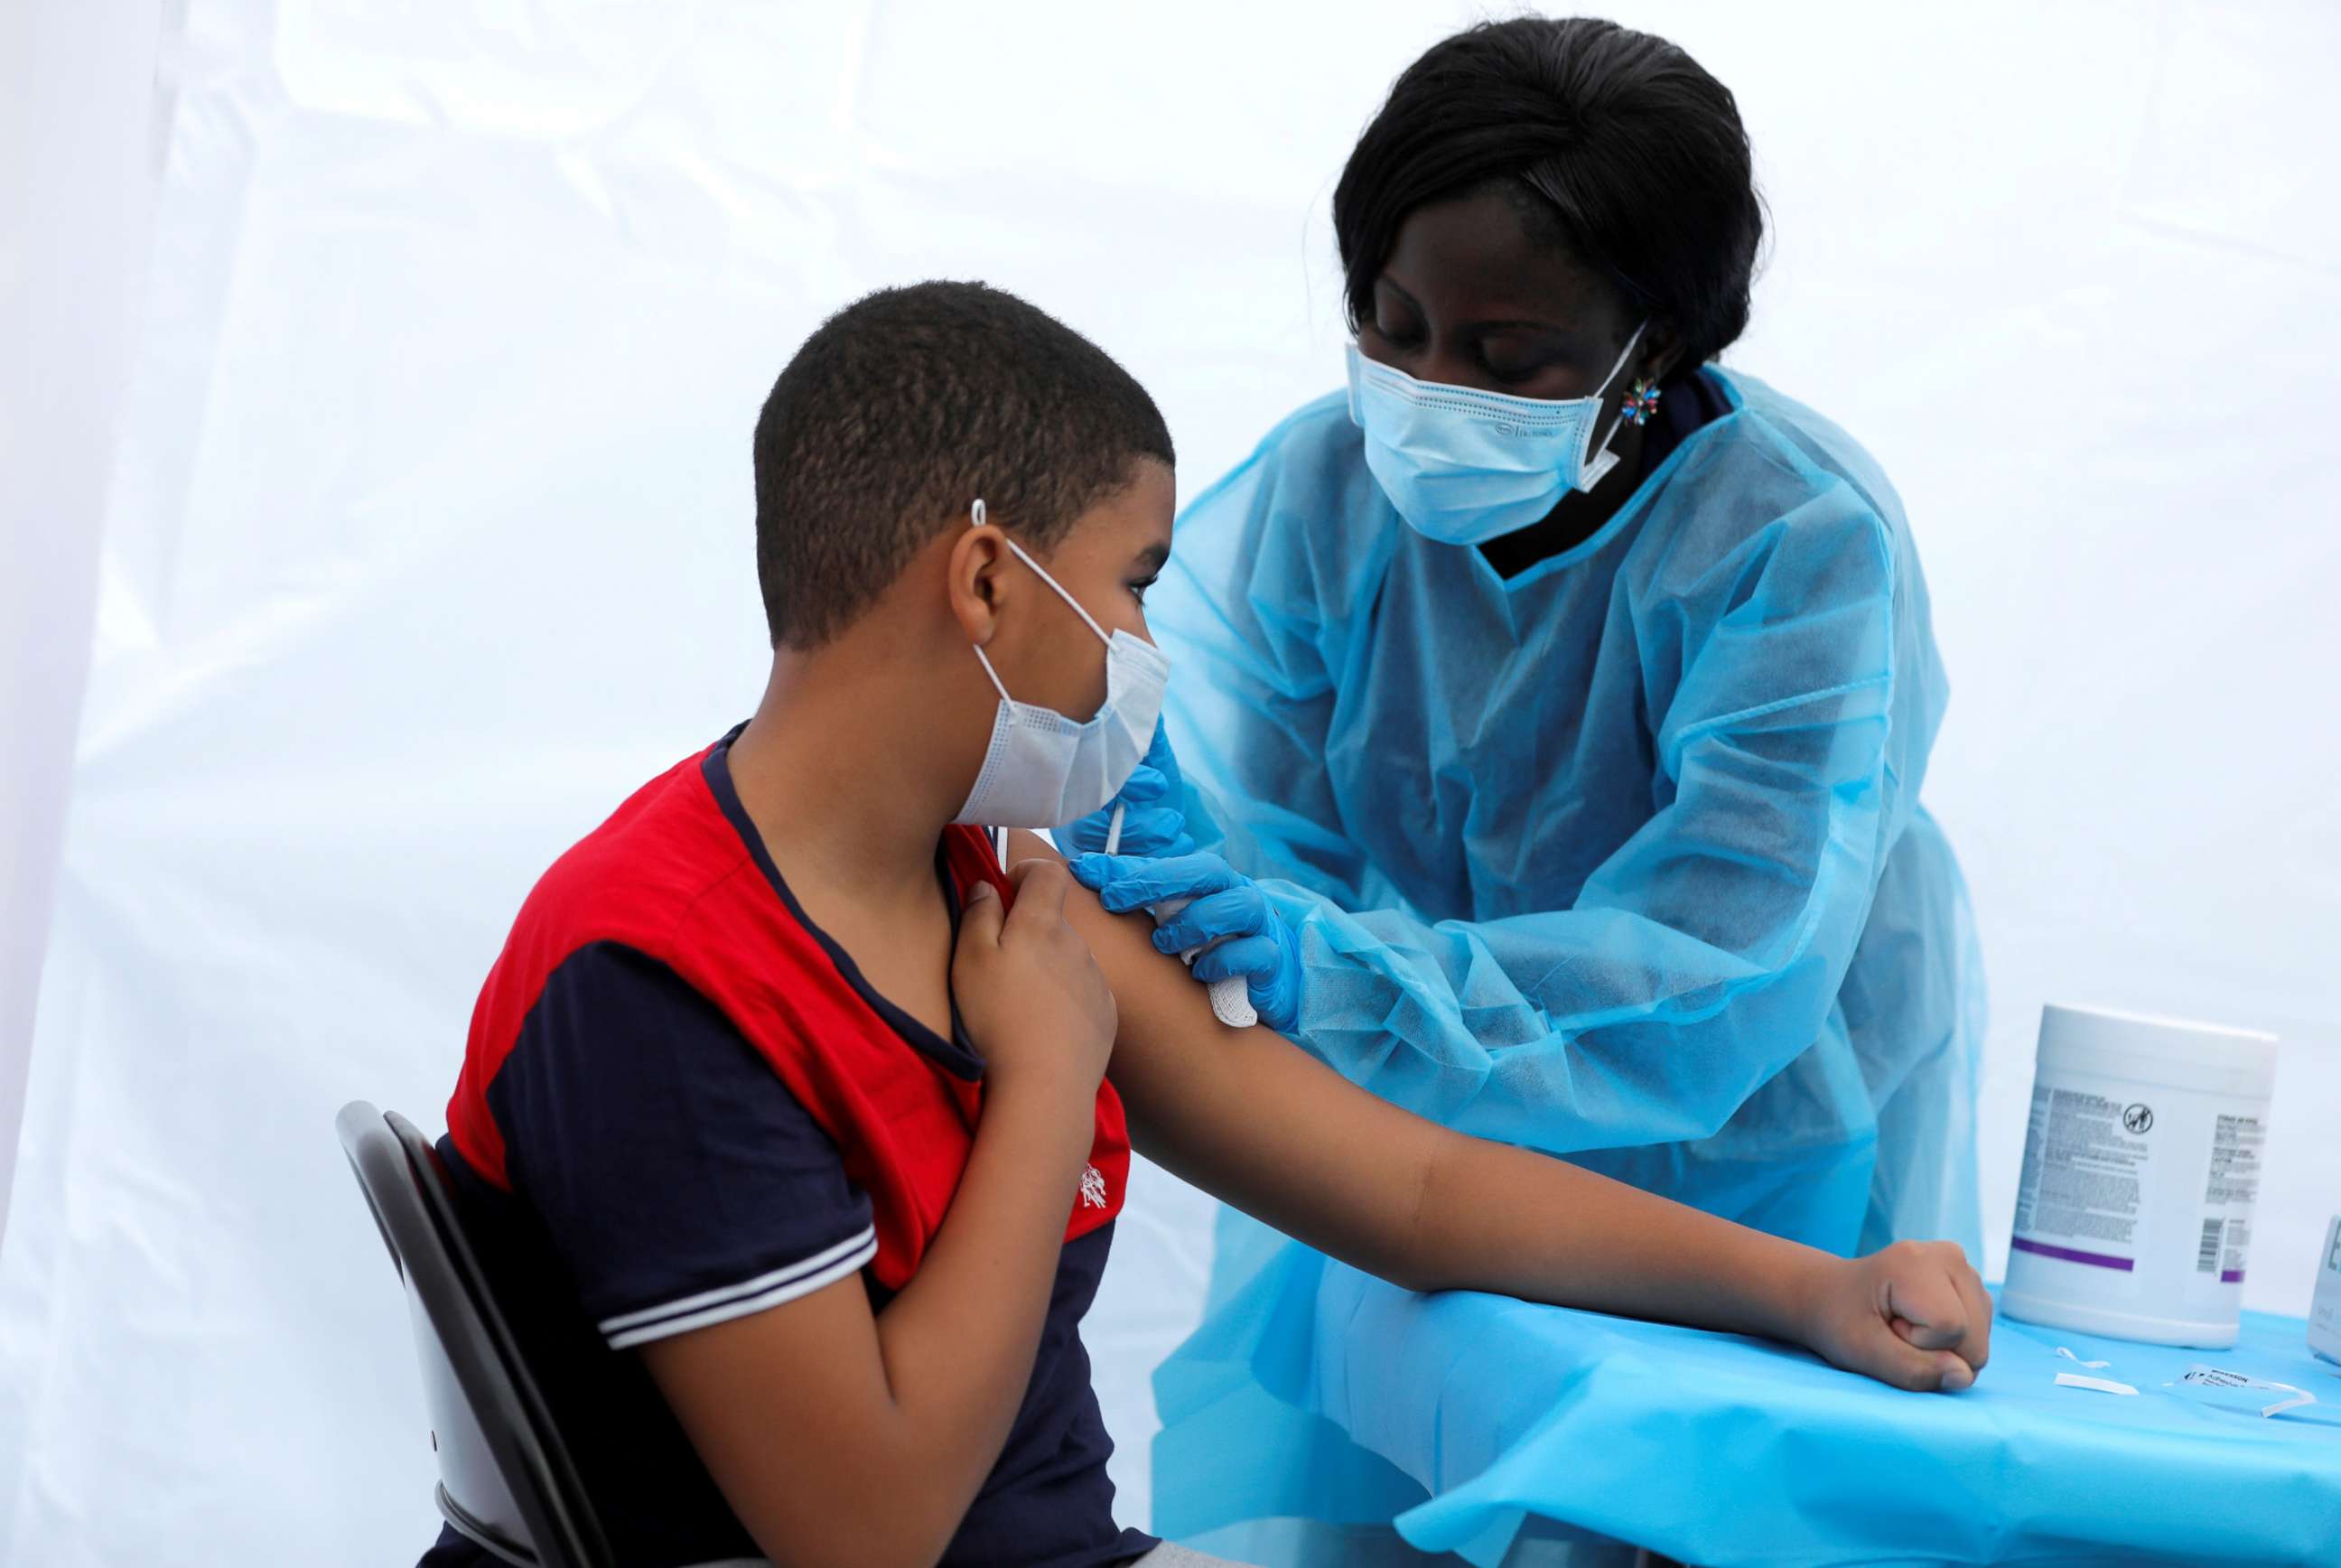 PHOTO: A 12-year-old receives a dose of the Pfizer-BioNTech vaccine for COVID-19 during a vaccination event in New York, June 4, 2021.